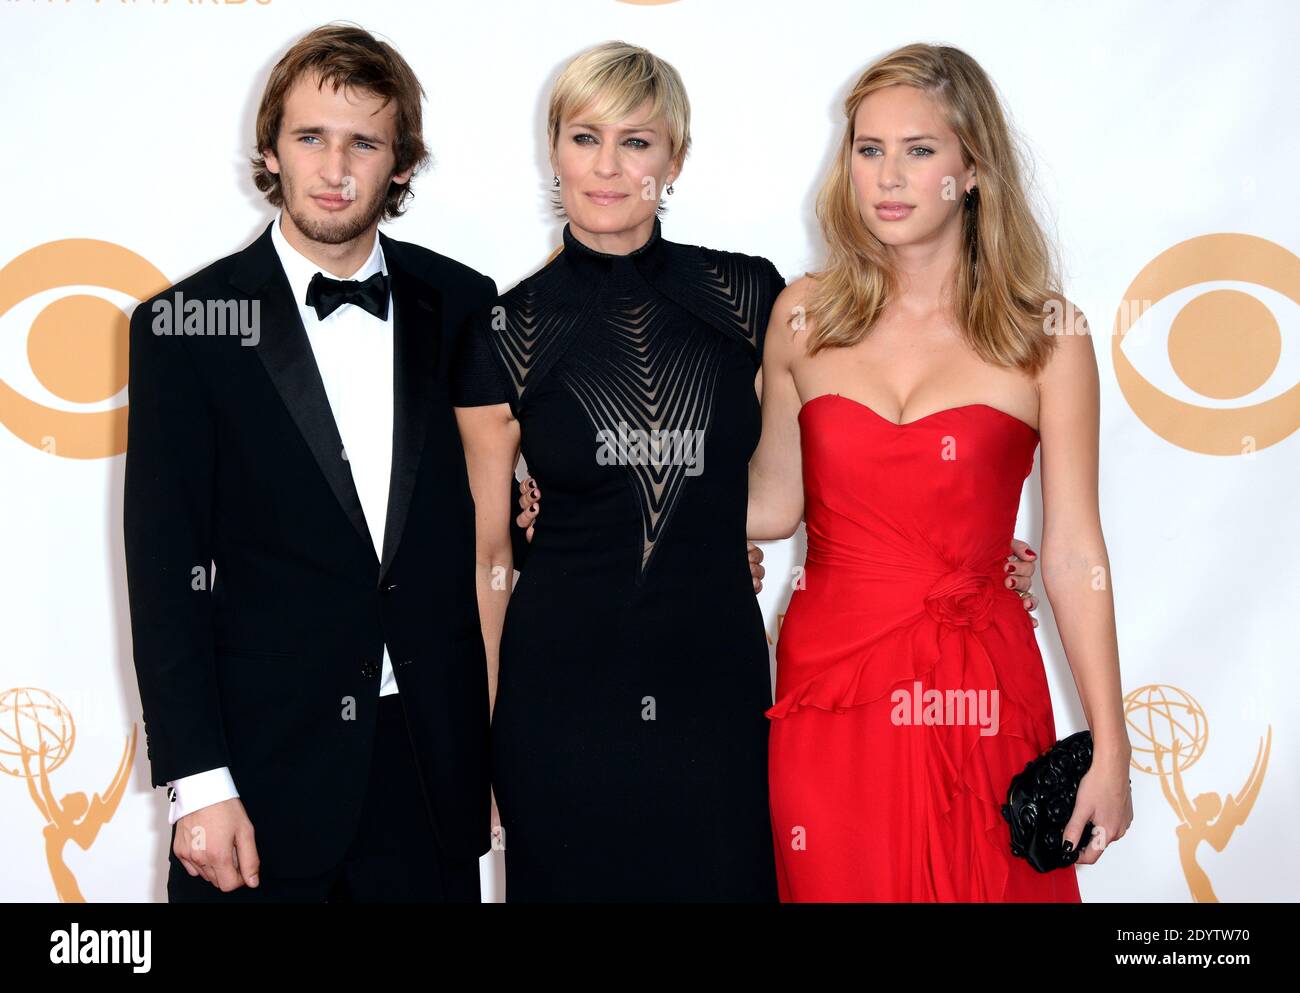 Dylan Penn, Robin Wright and Hopper Penn arrive at the 65th Annual Primetime Emmy Awards held at Nokia Theatre L.A. Live on September 22, 2013 in Los Angeles, CA, USA. Photo by Lionel Hahn/ABACAPRESS.COM Stock Photo